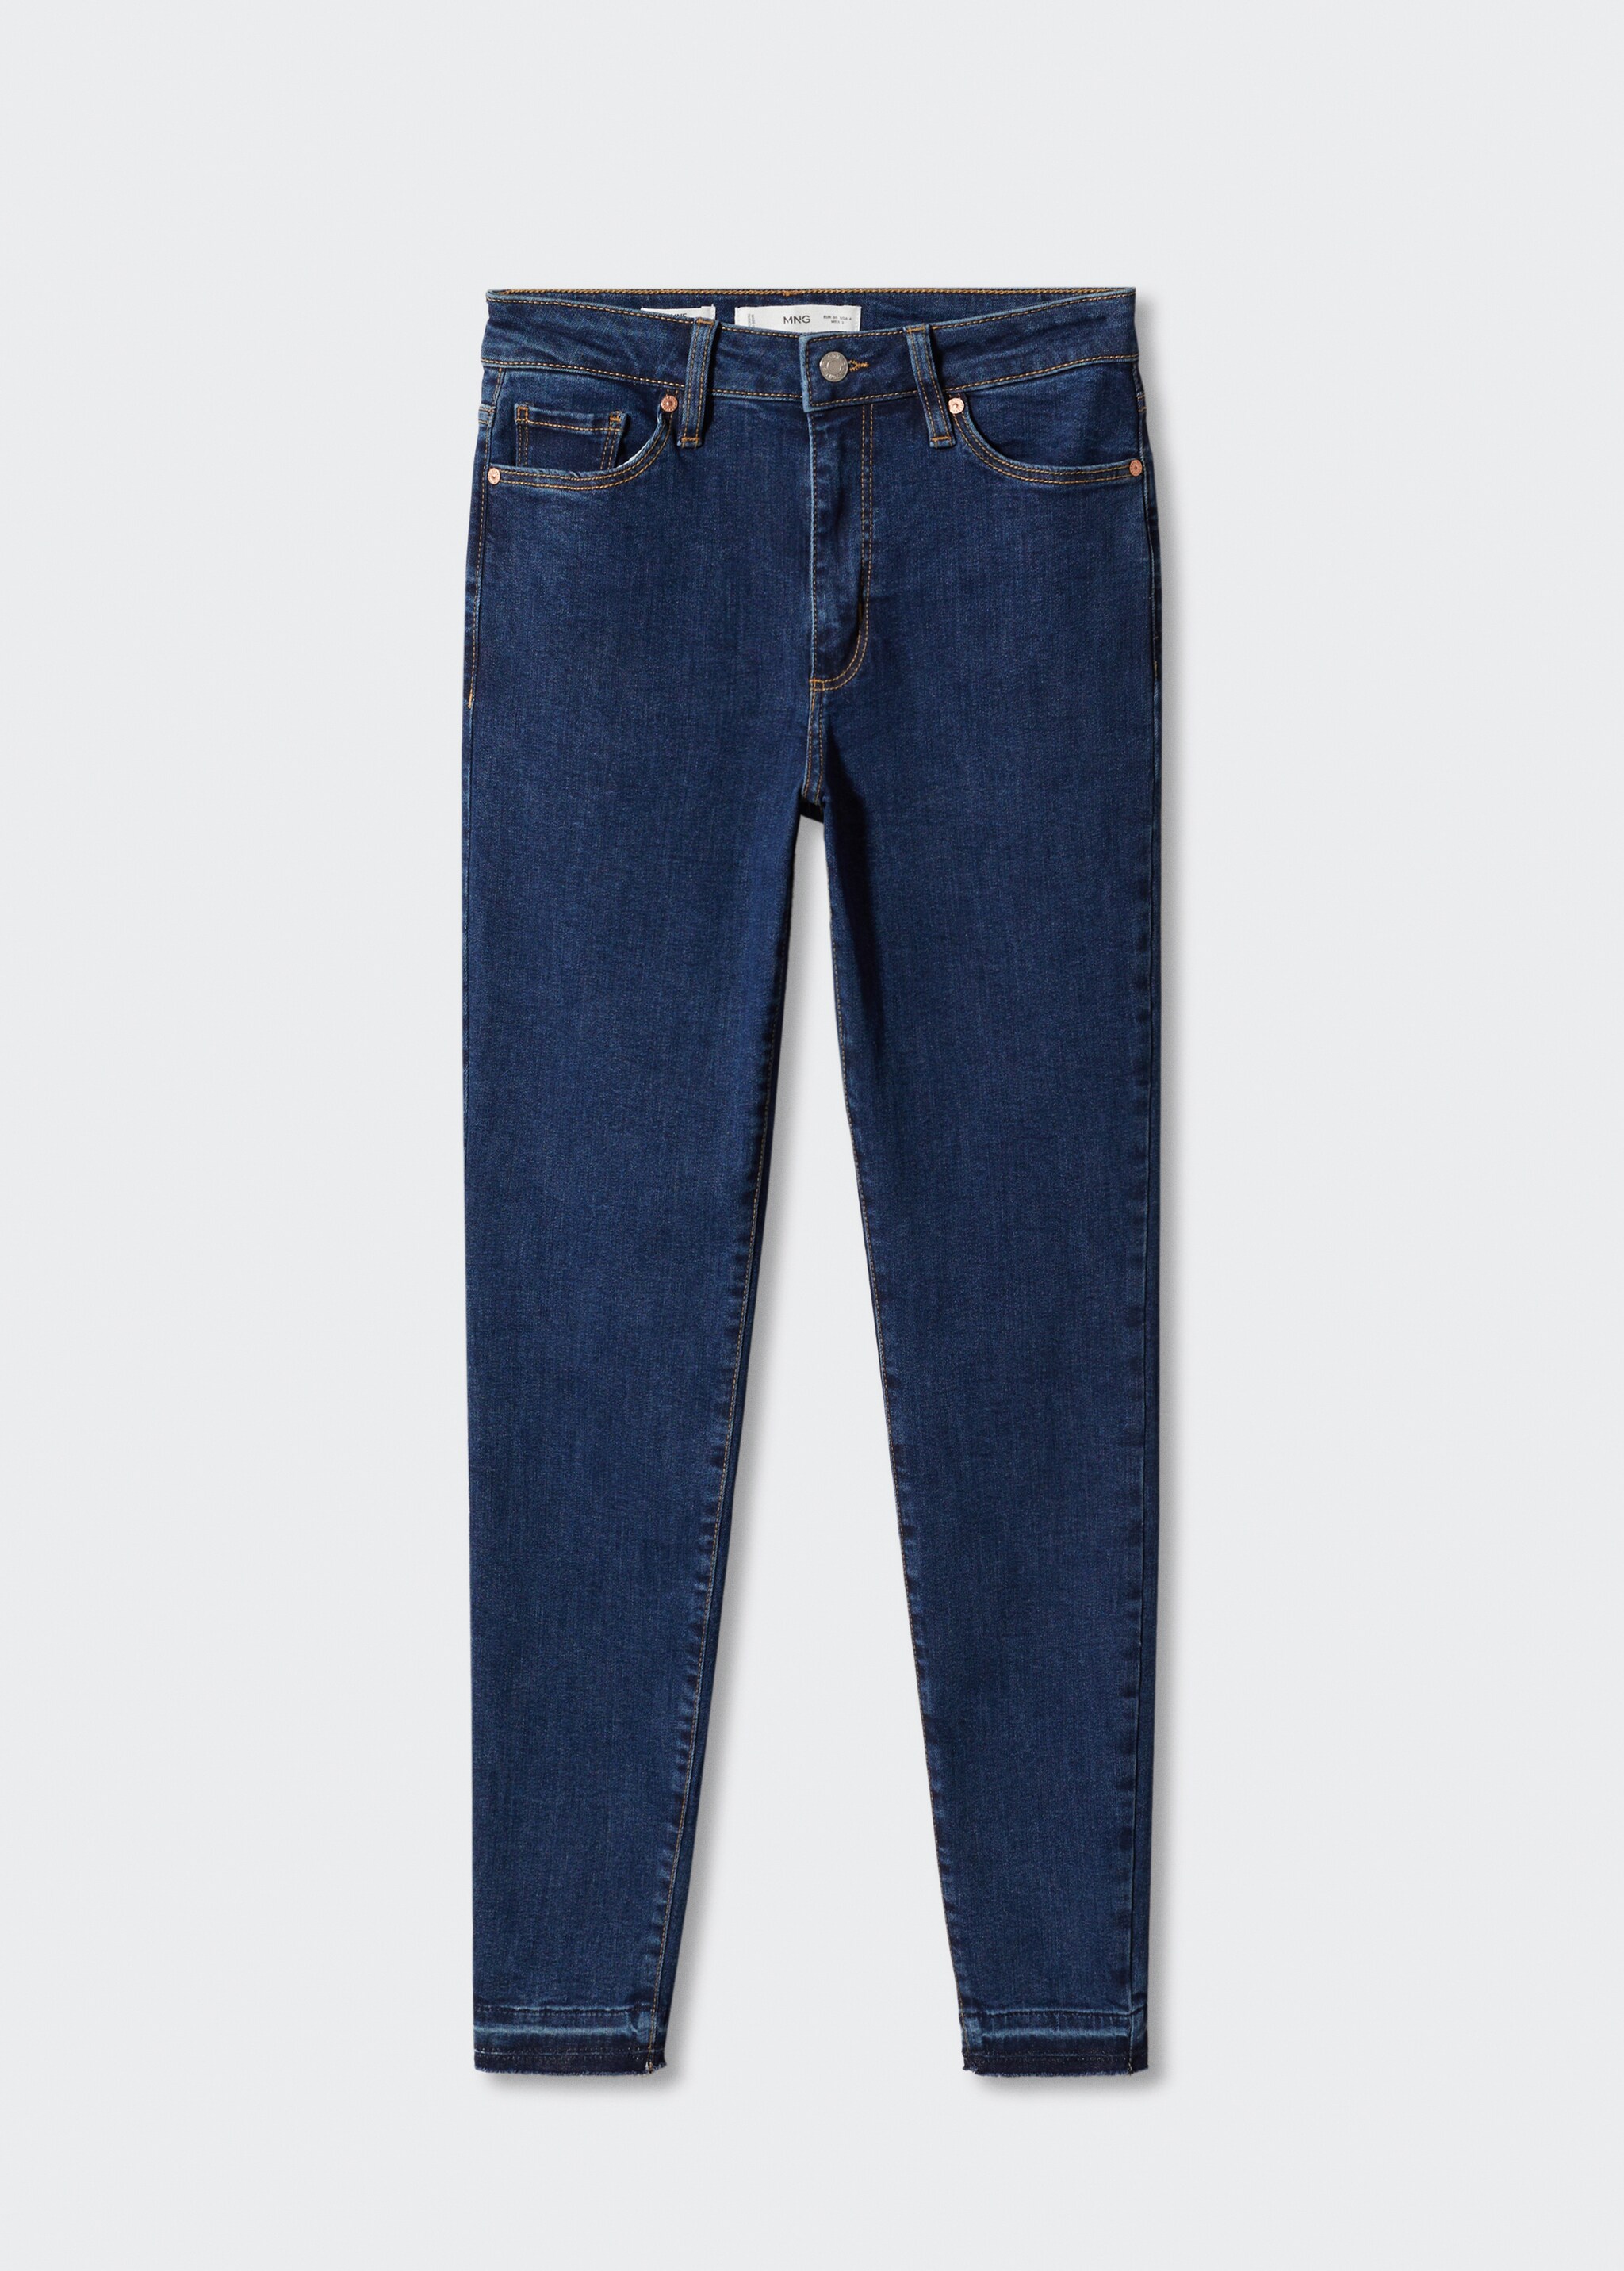 High-rise skinny jeans - Article without model